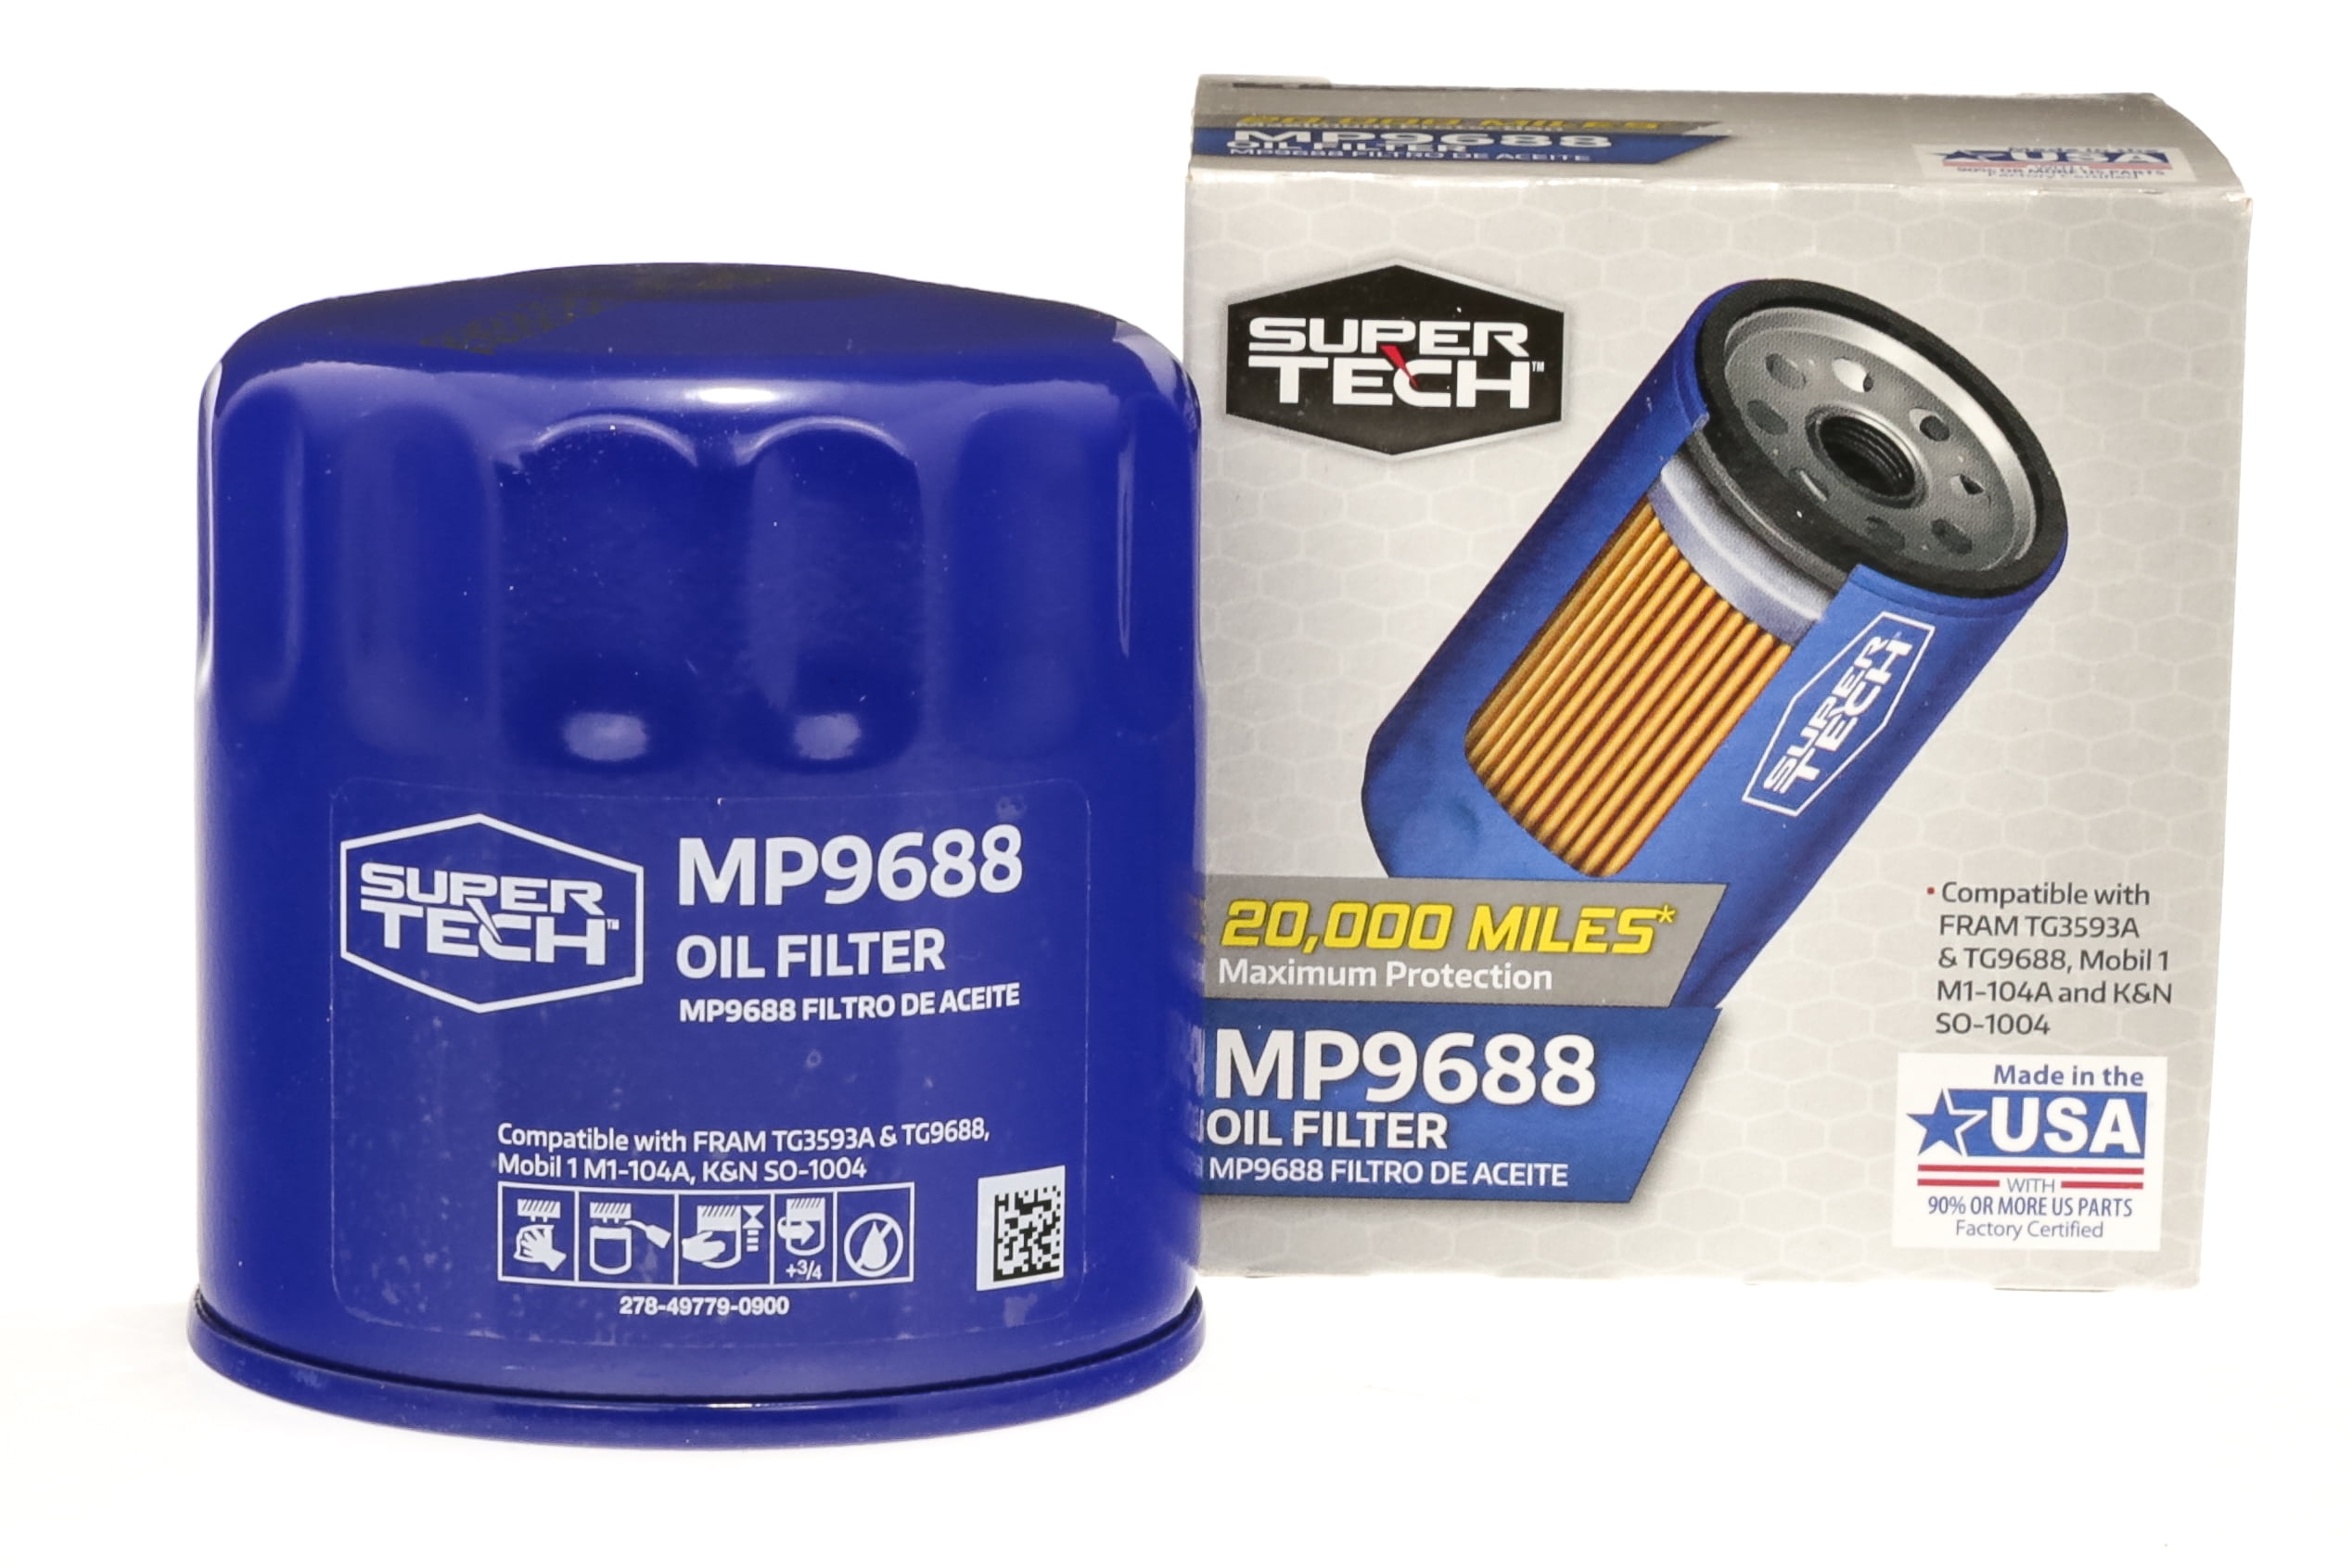 supertech-maximum-performance-20-000-mile-replacement-synthetic-oil-filter-mp9688-for-hyundai